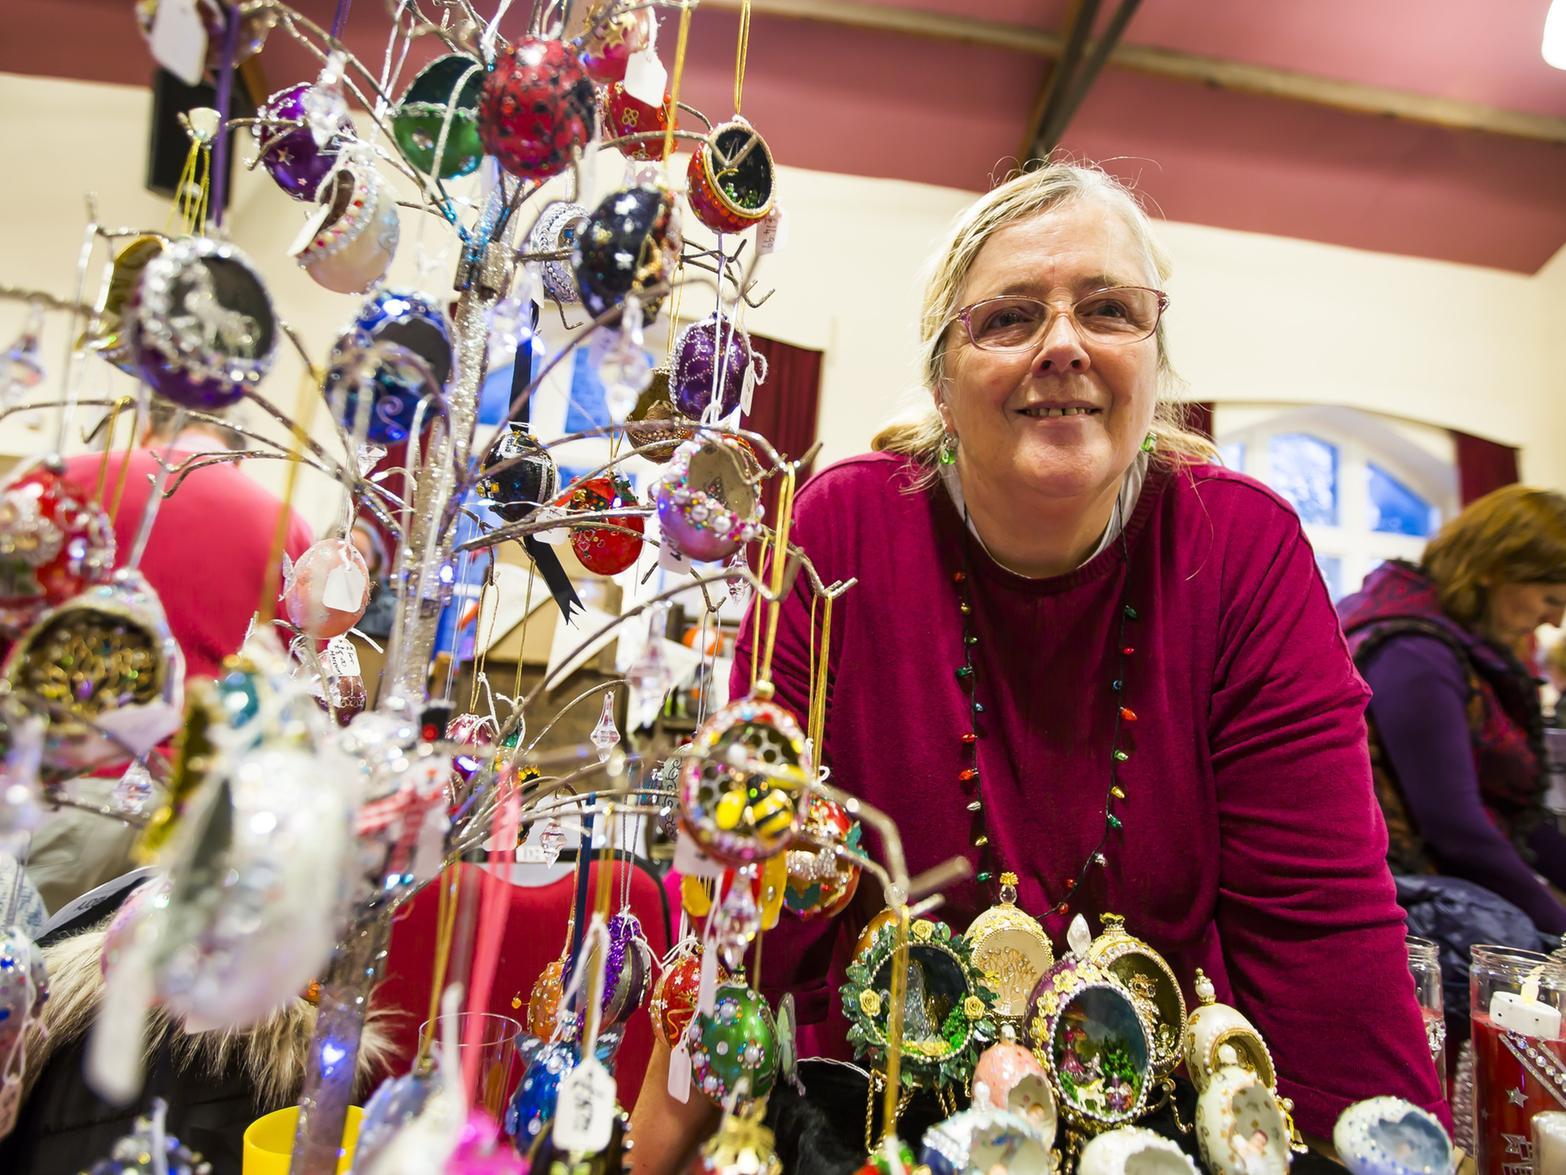 Melanie Rayner with her Keepsake Eggs and Candles stall at the festive market.